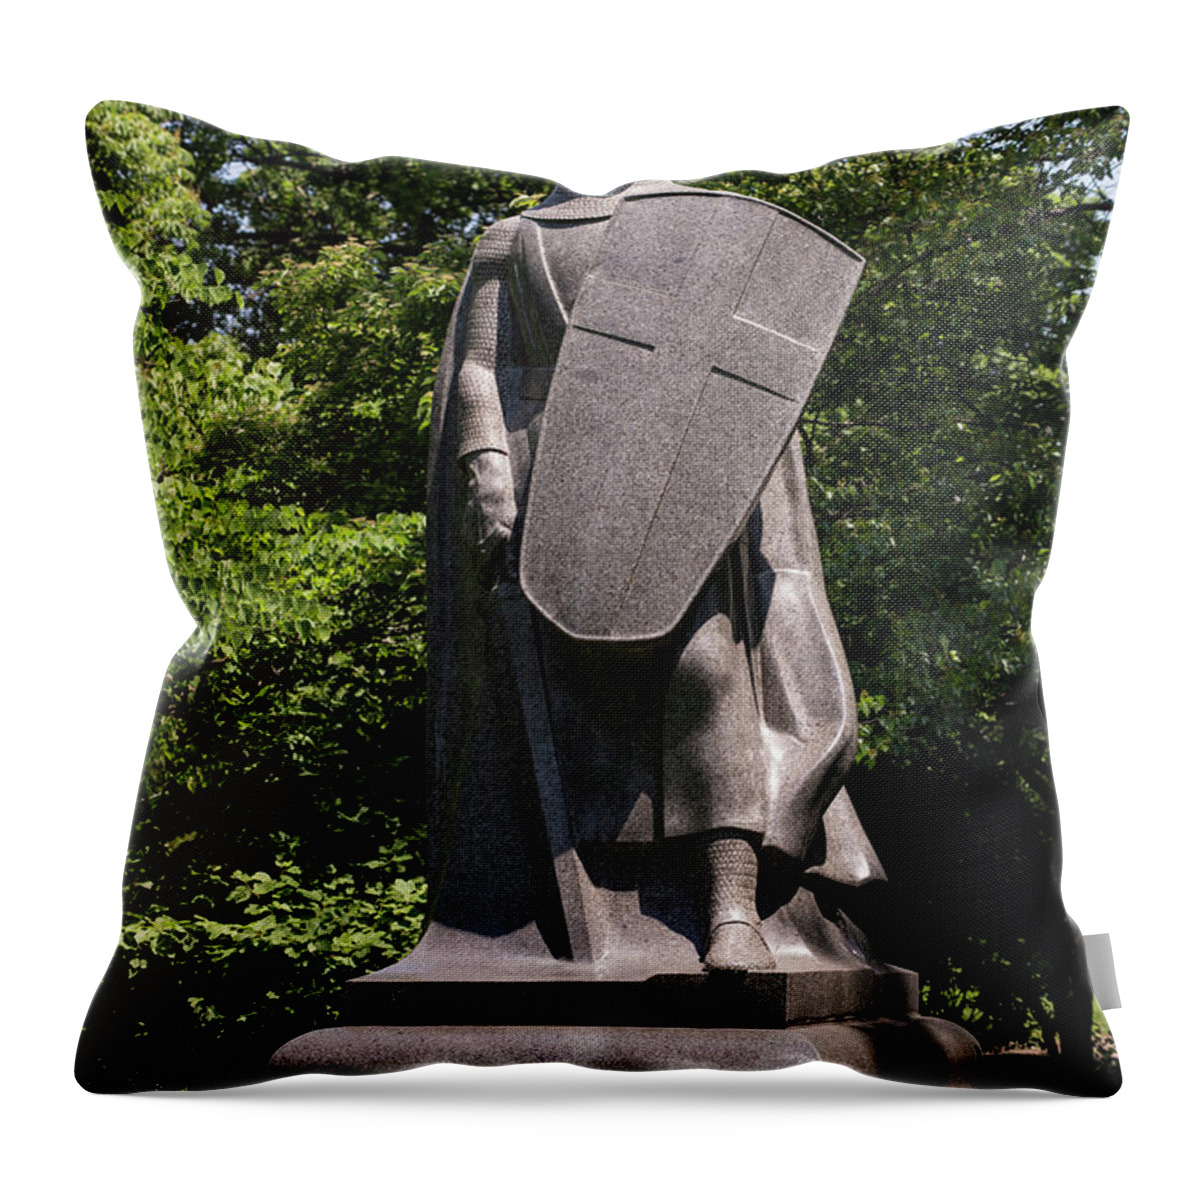 Chicago Throw Pillow featuring the photograph Crusader by David Bearden